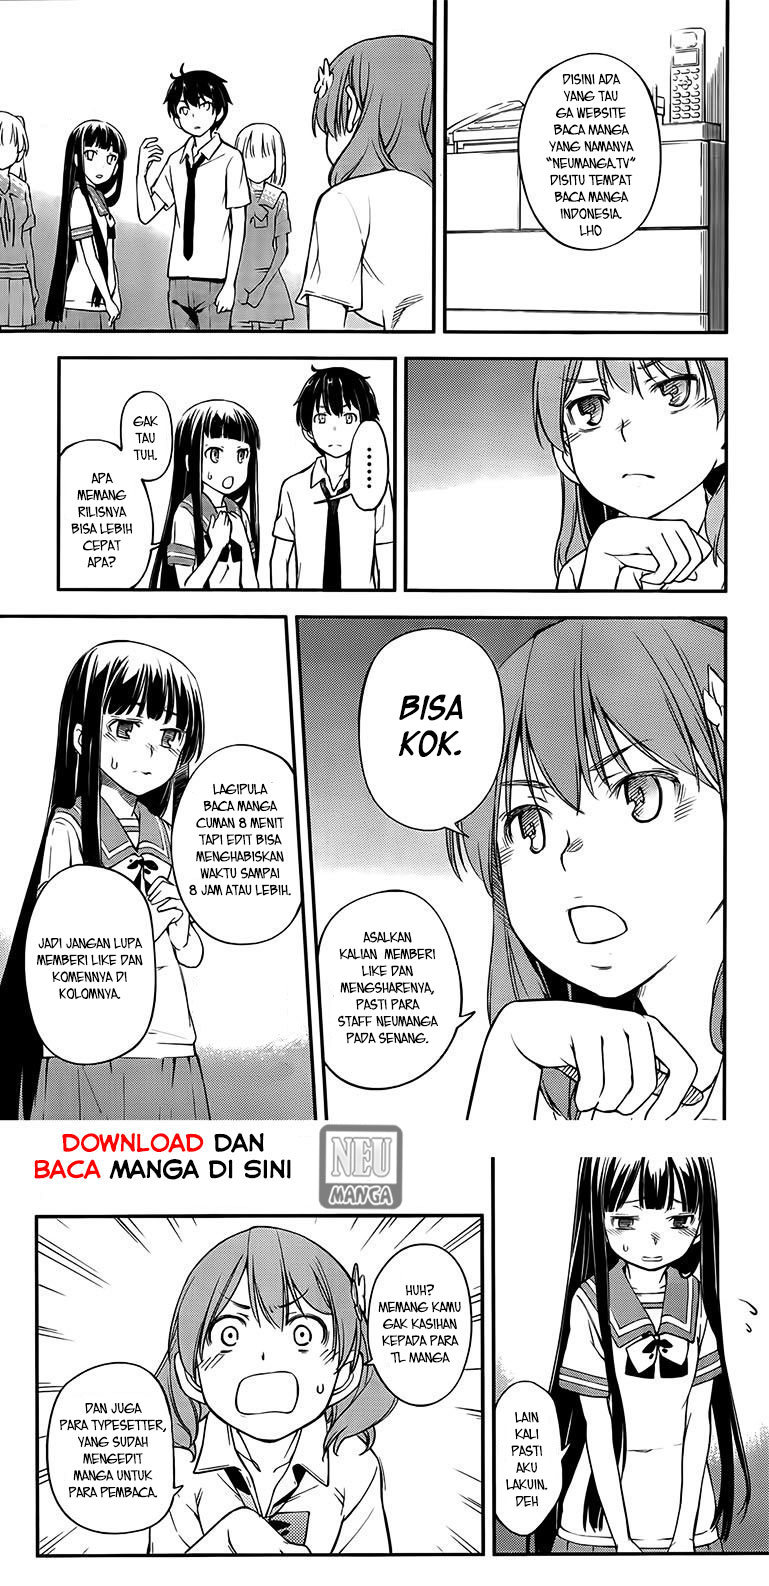 Holy Ancestor Chapter 75